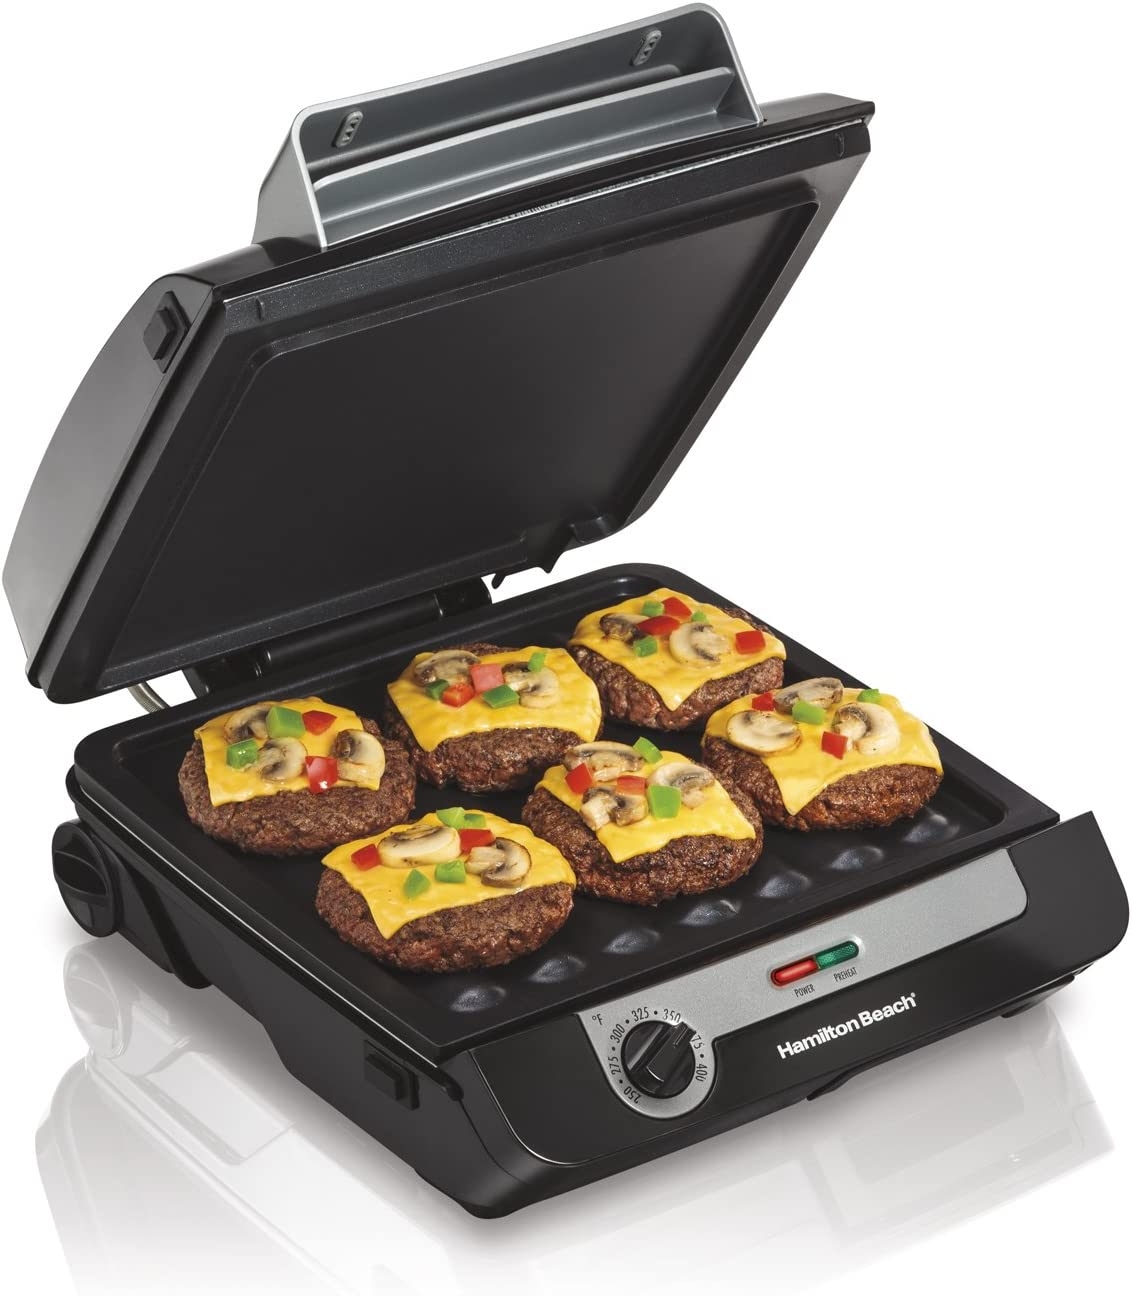 Hamilton Beach 4-in-1 Indoor Grill & Electric Griddle Combo with Bacon Cooker, Opens Flat to Double Cooking Surface, Removable